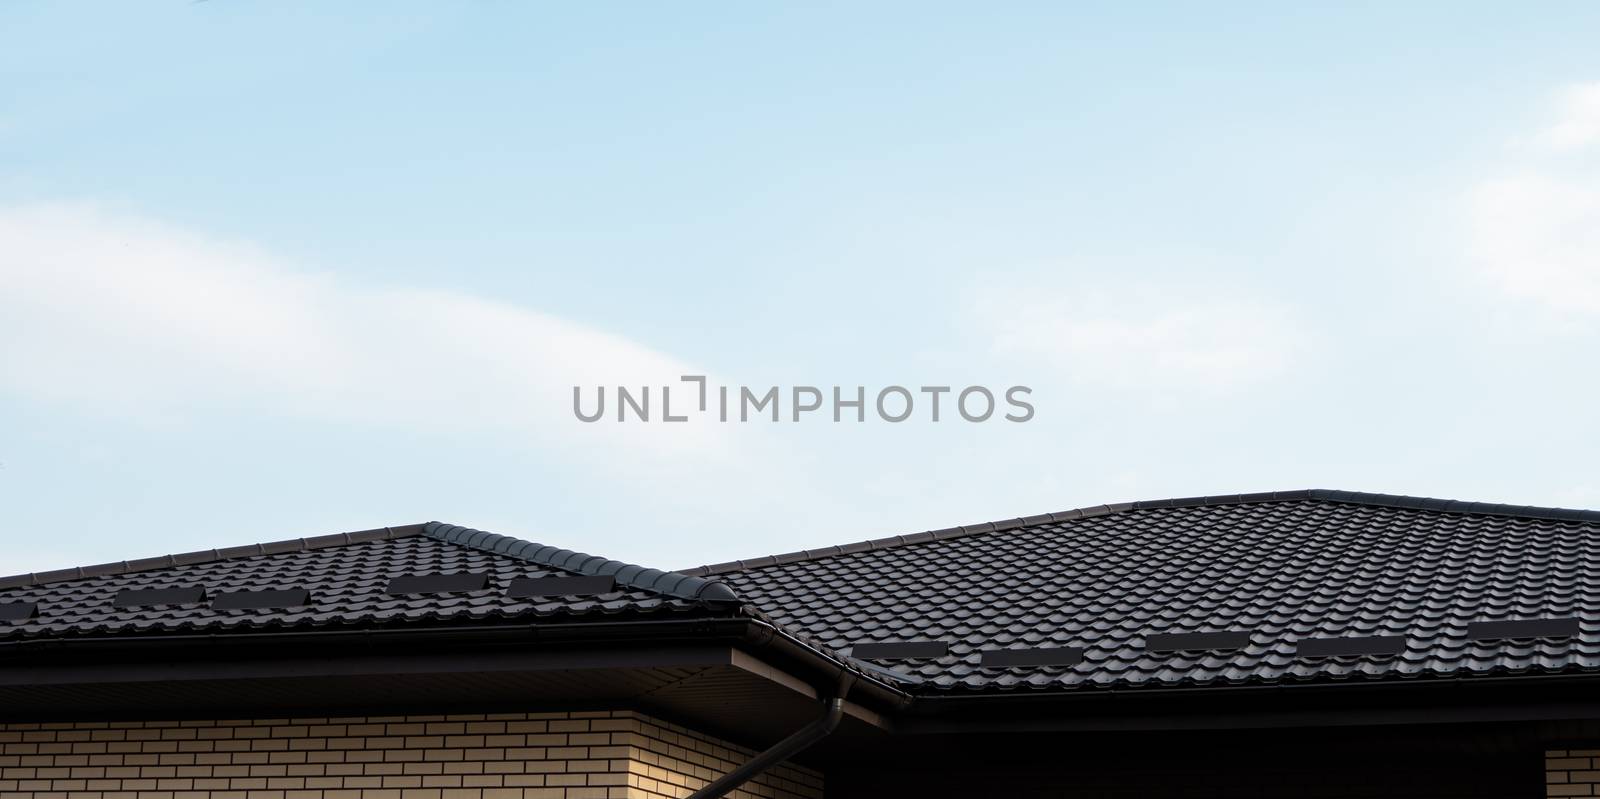 Brown metal tile roof. Roof metal sheets. Modern types of roofing materials. Roof of the house, metal roof tile against the blue sky. Building